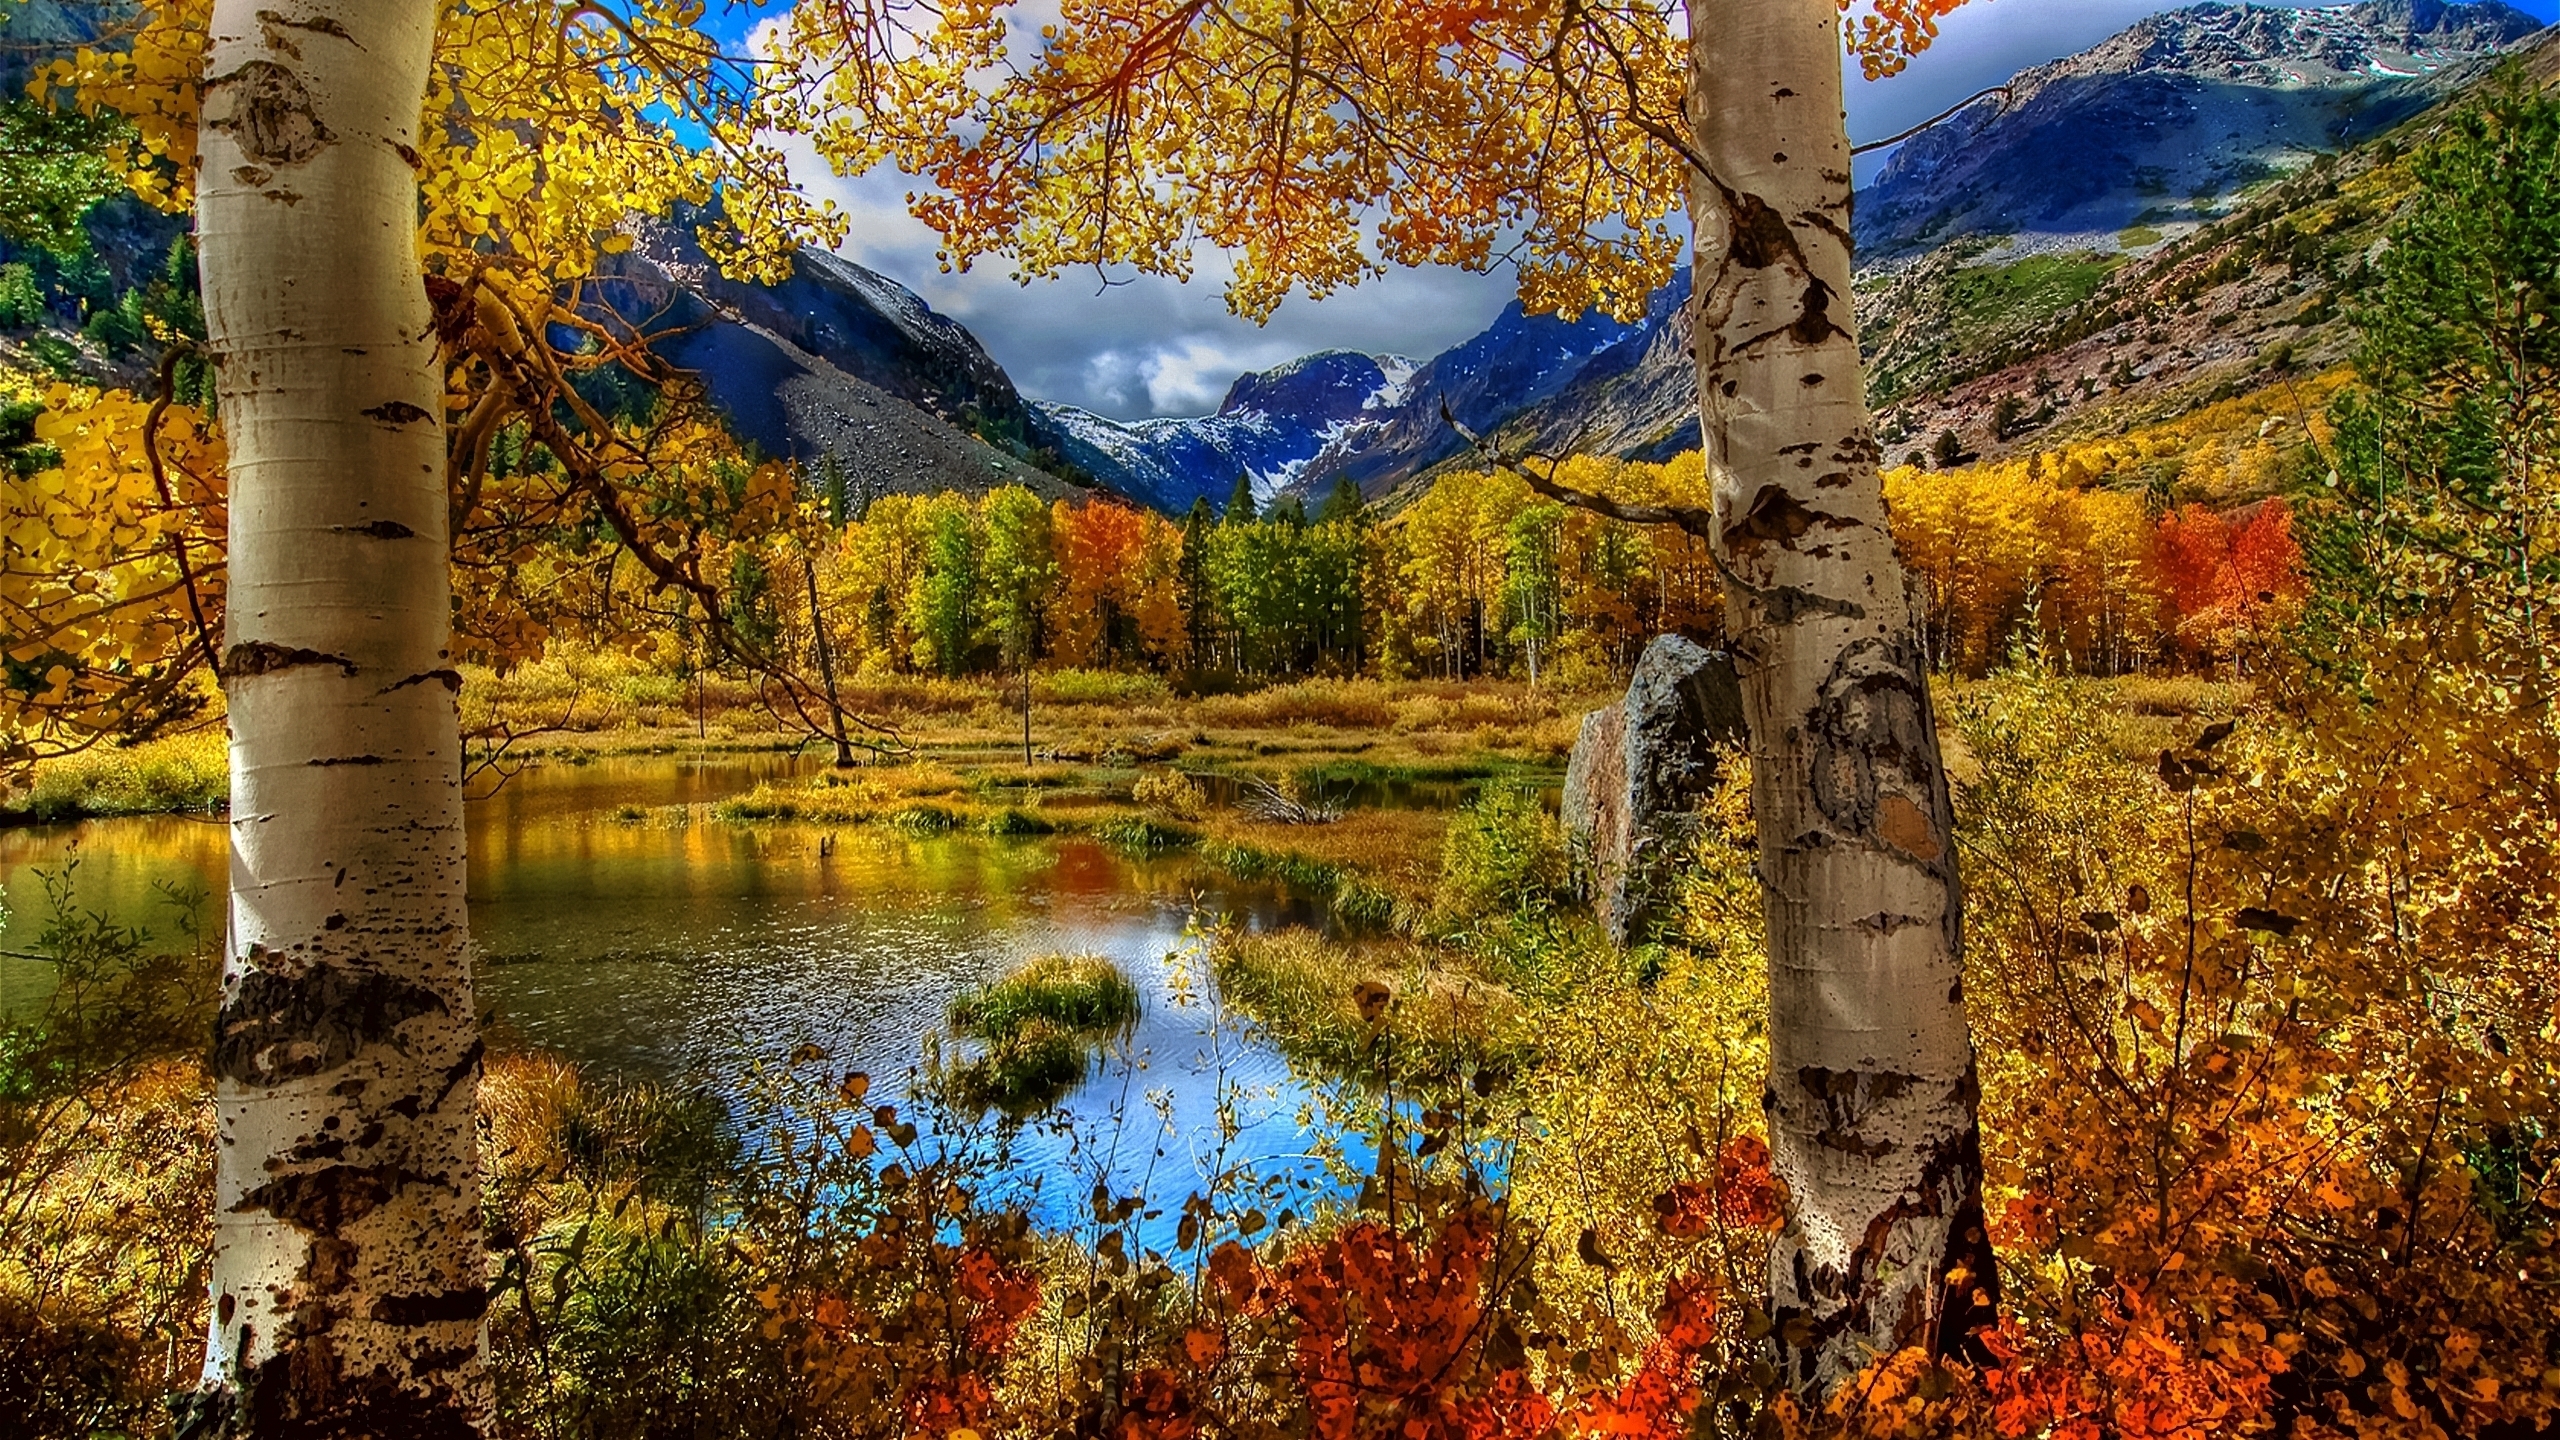 Amazing Autumn View for 2560x1440 HDTV resolution